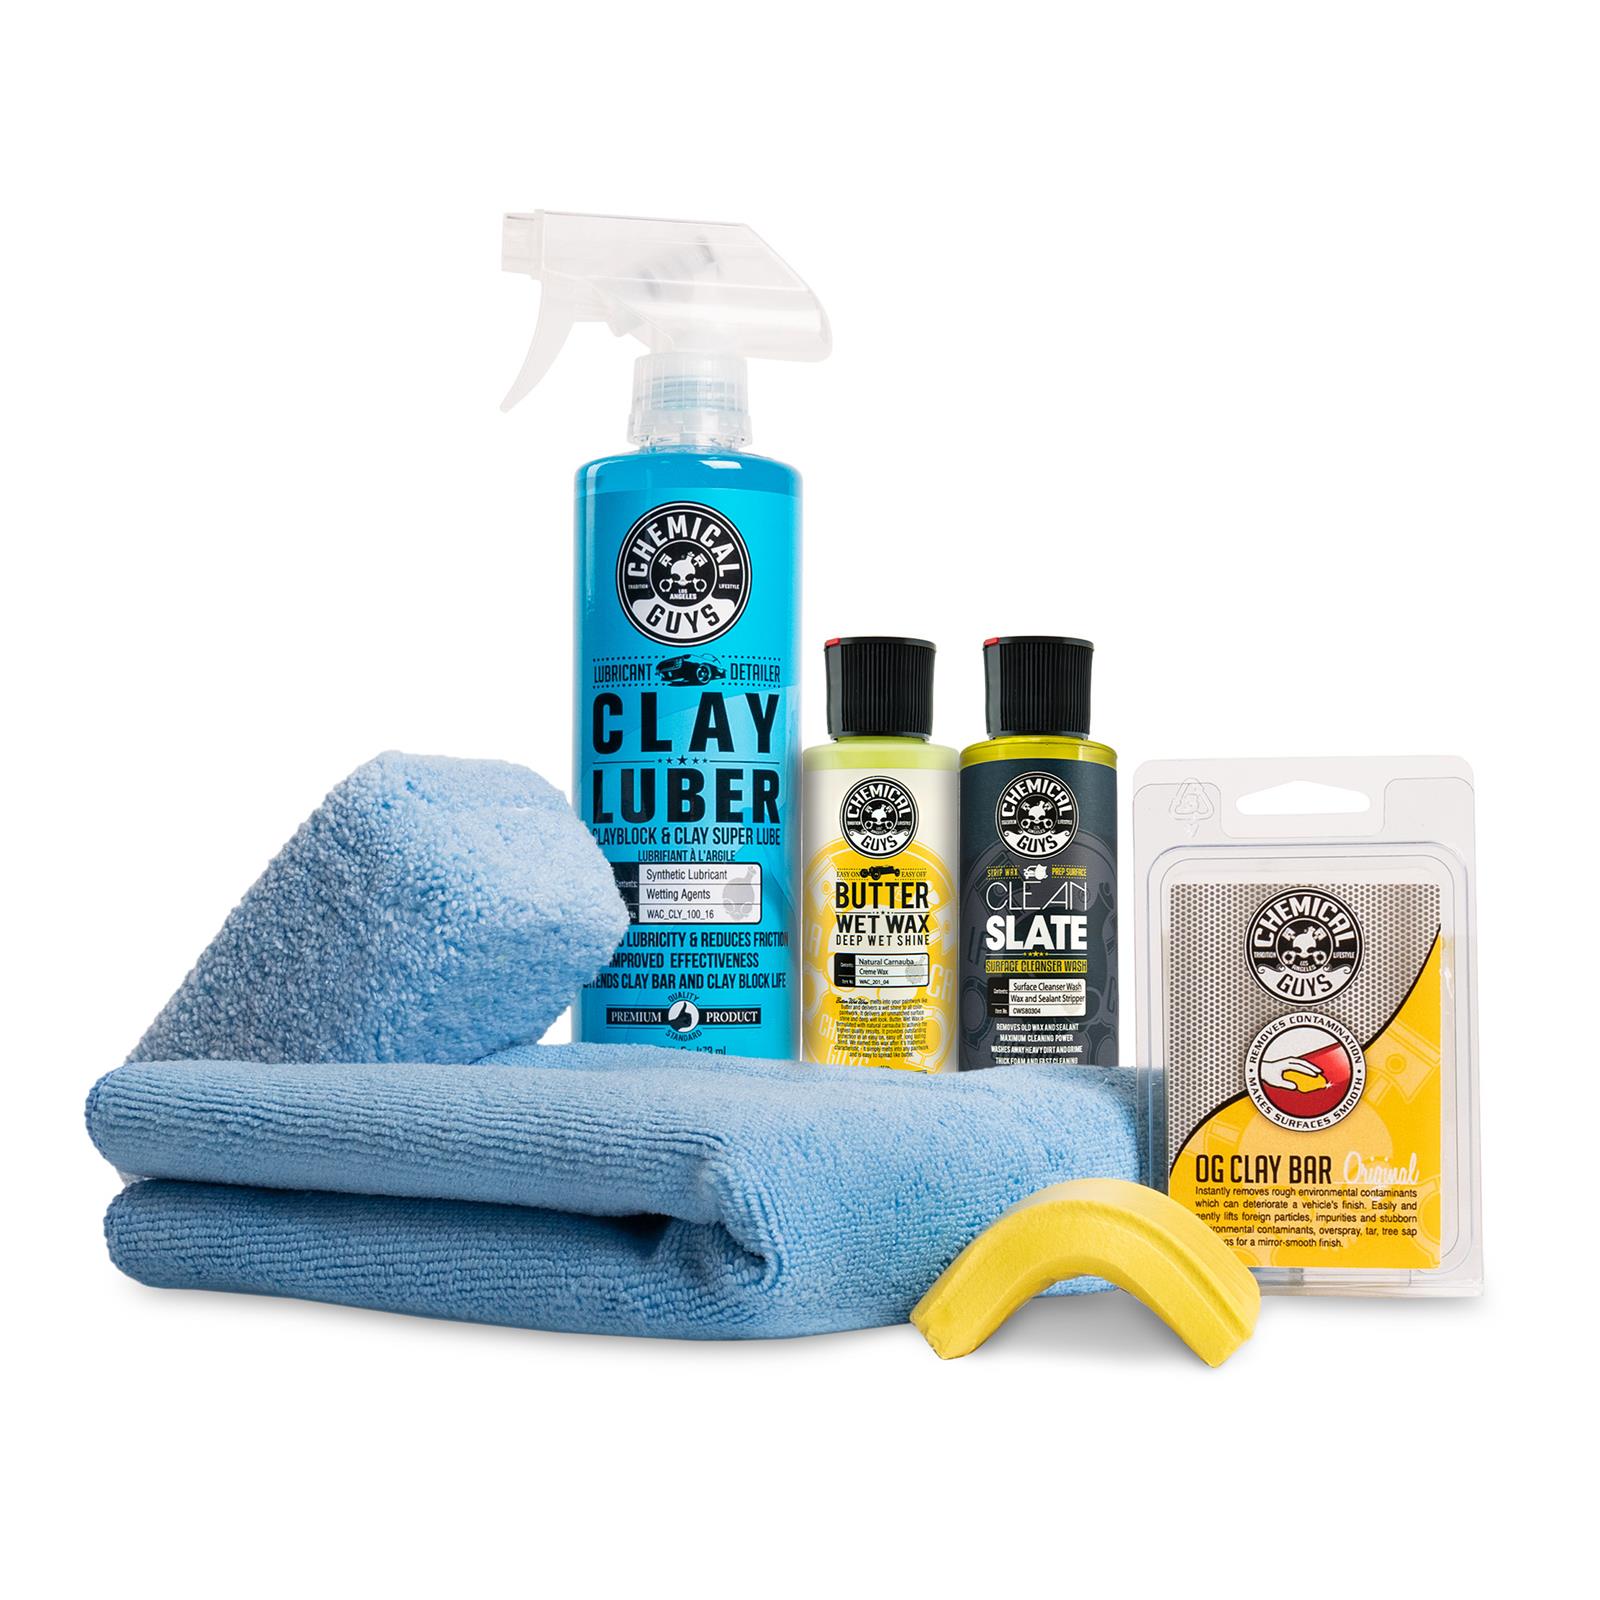 Chemical Guys - All Products in Auto Detailing & Car Care 